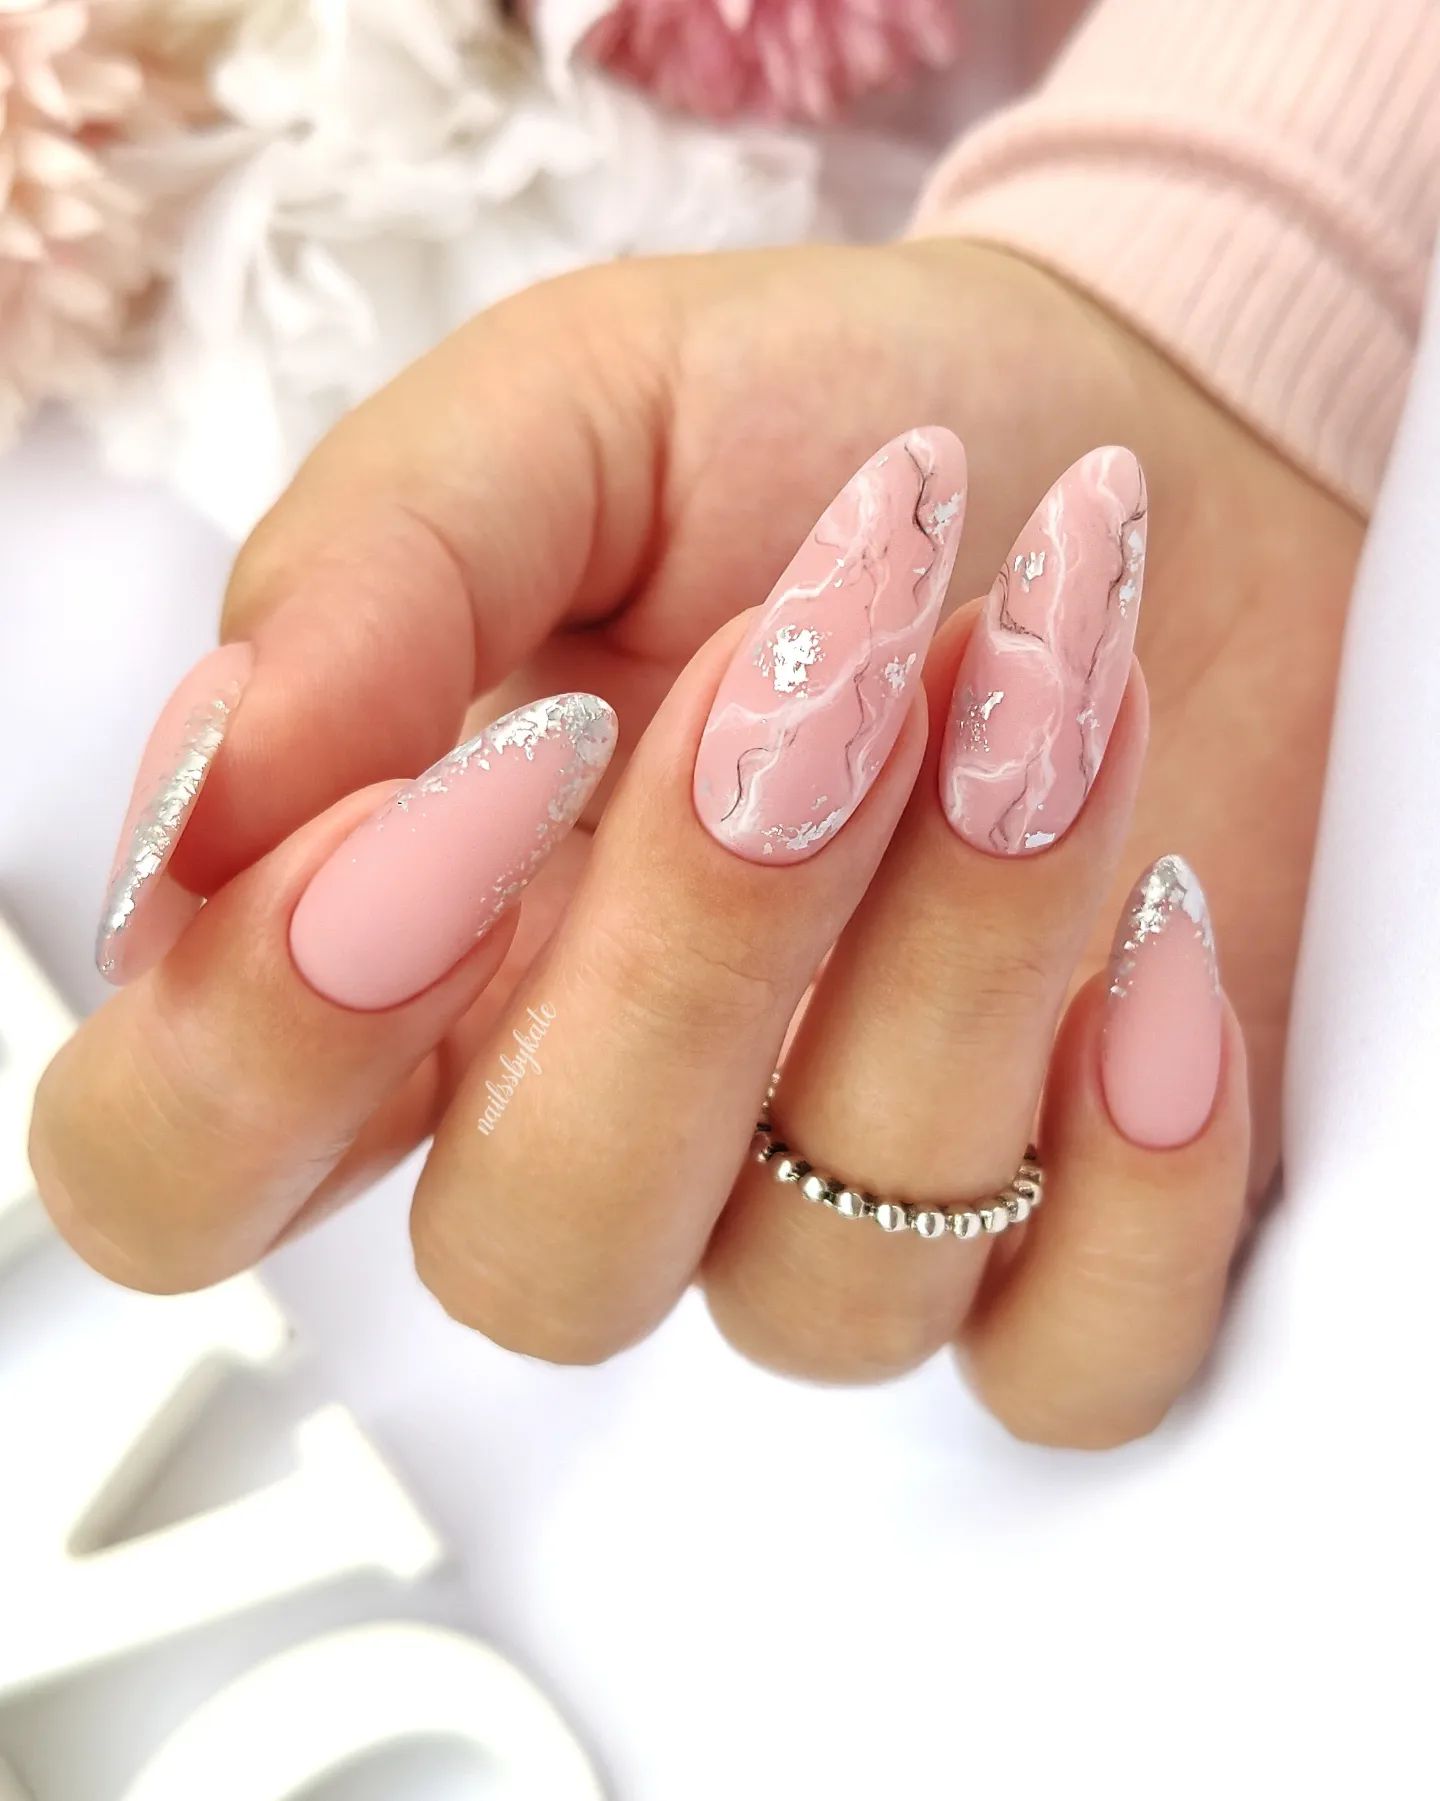 Not all wedding nails have to be white, right? So let's give it a shot to pinkish nude nail polish. In the example, matte one looks amazing with silver glitter nail art.